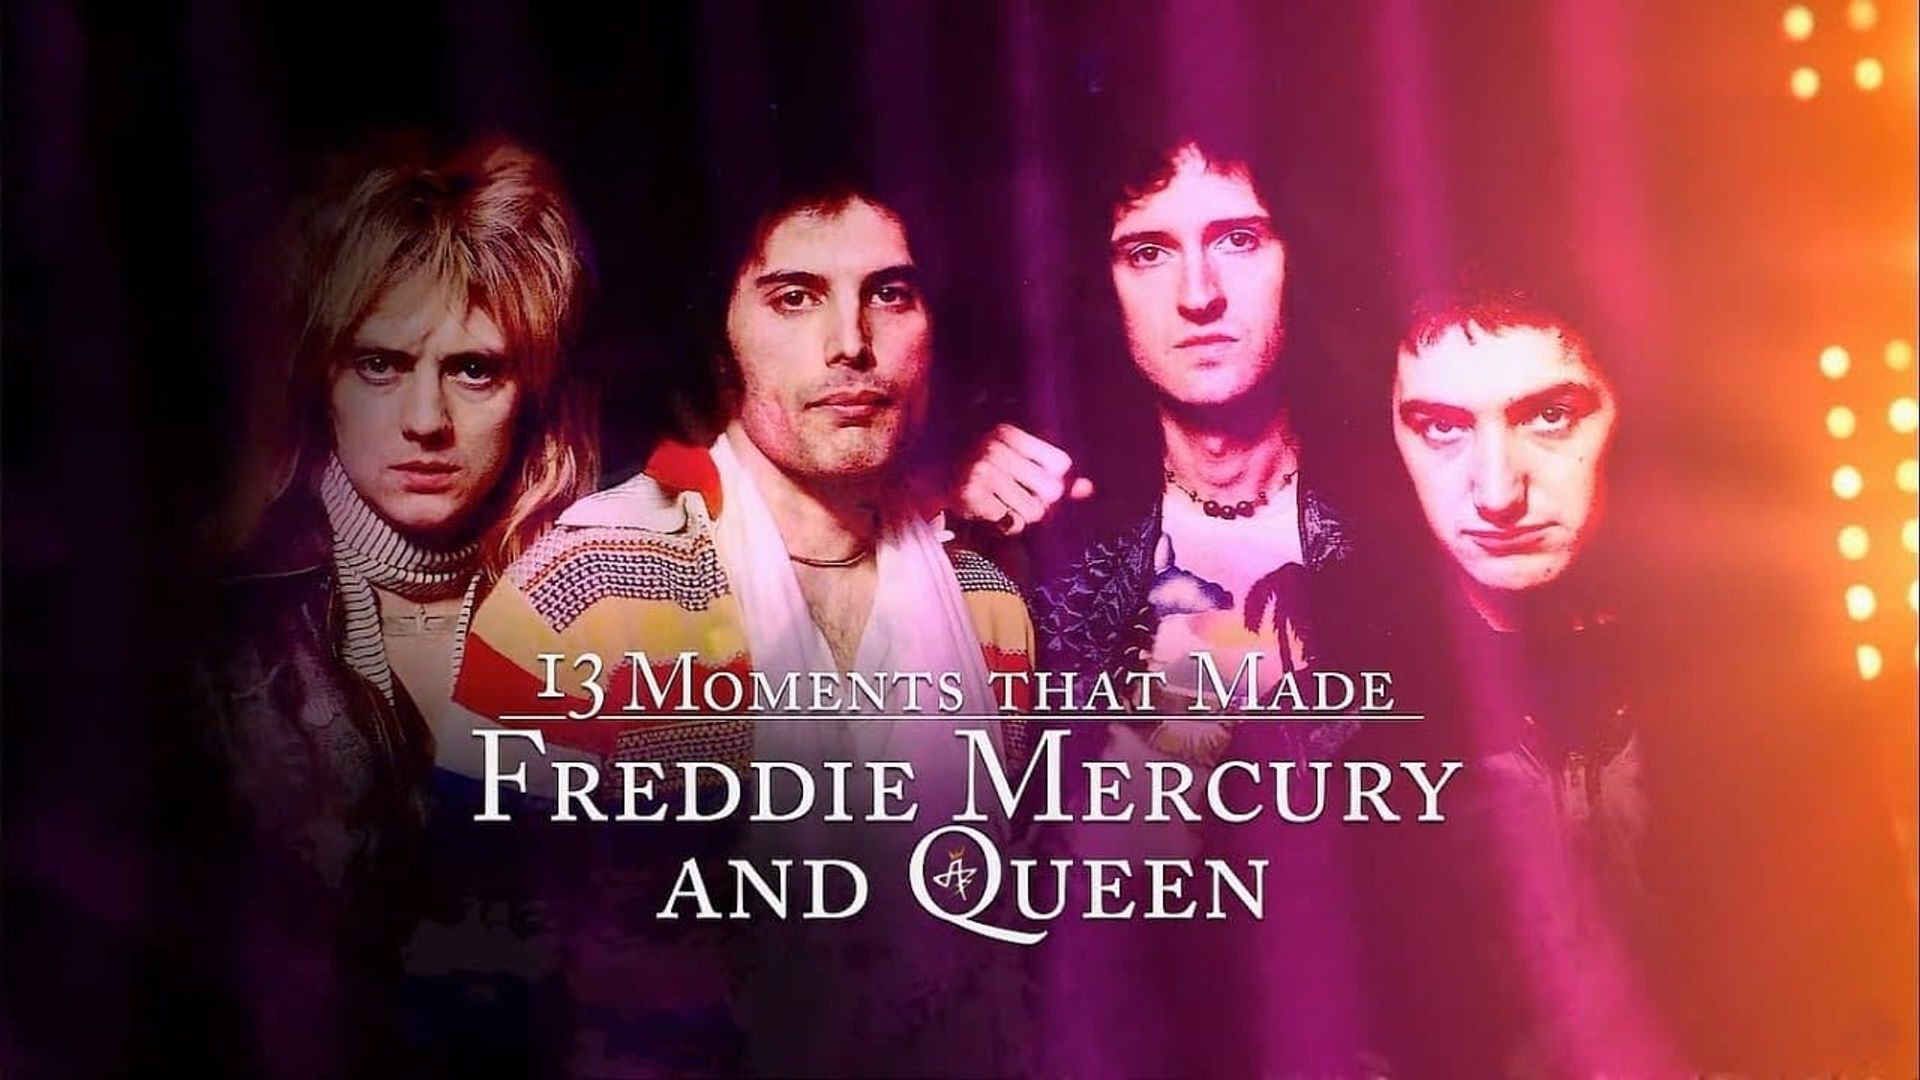 13 Moments That Made Freddie Mercury and Queen background